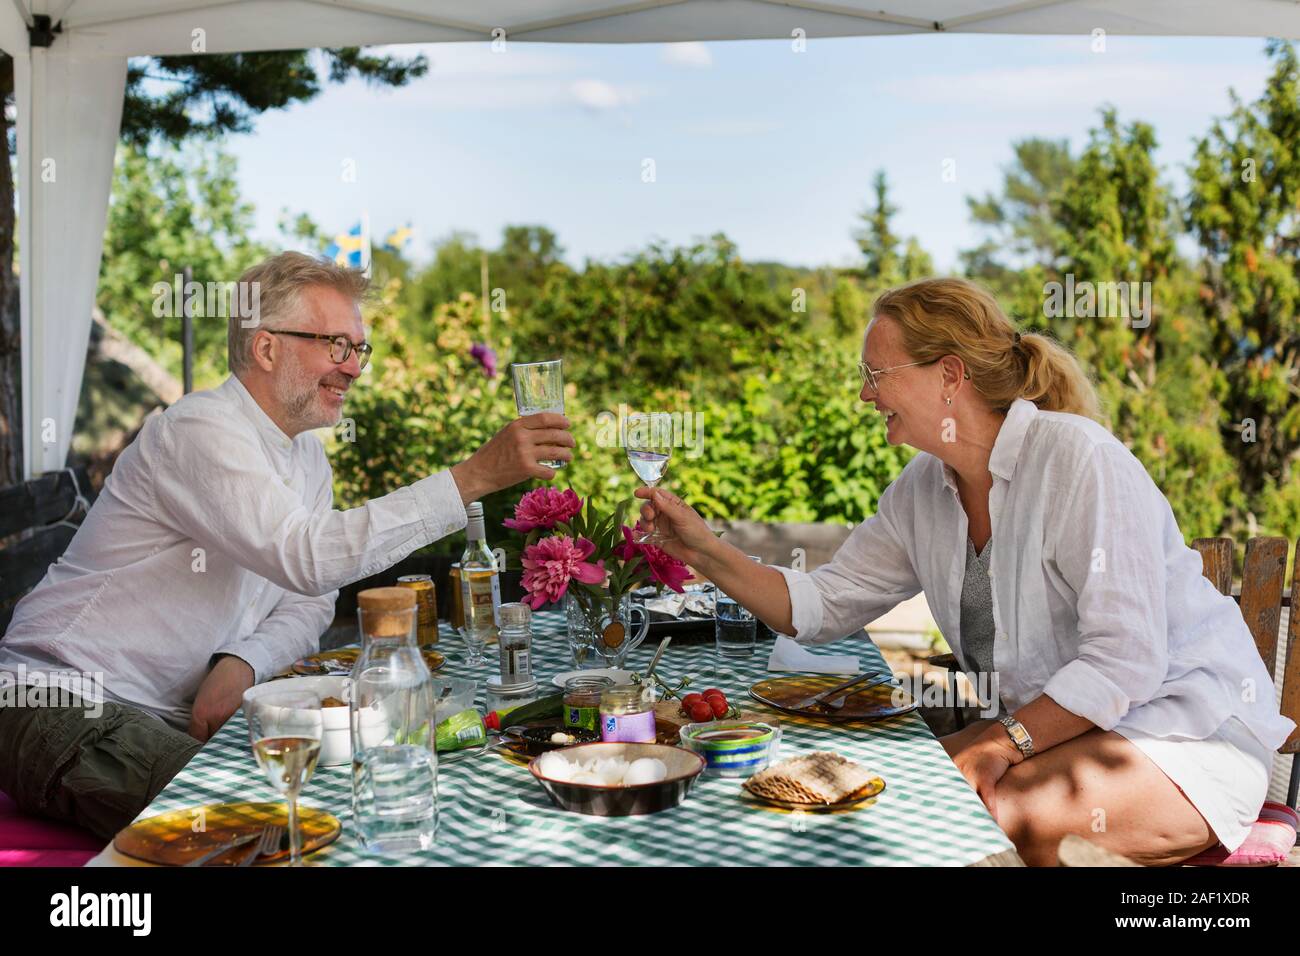 Mature couple having meal in garden Stock Photo